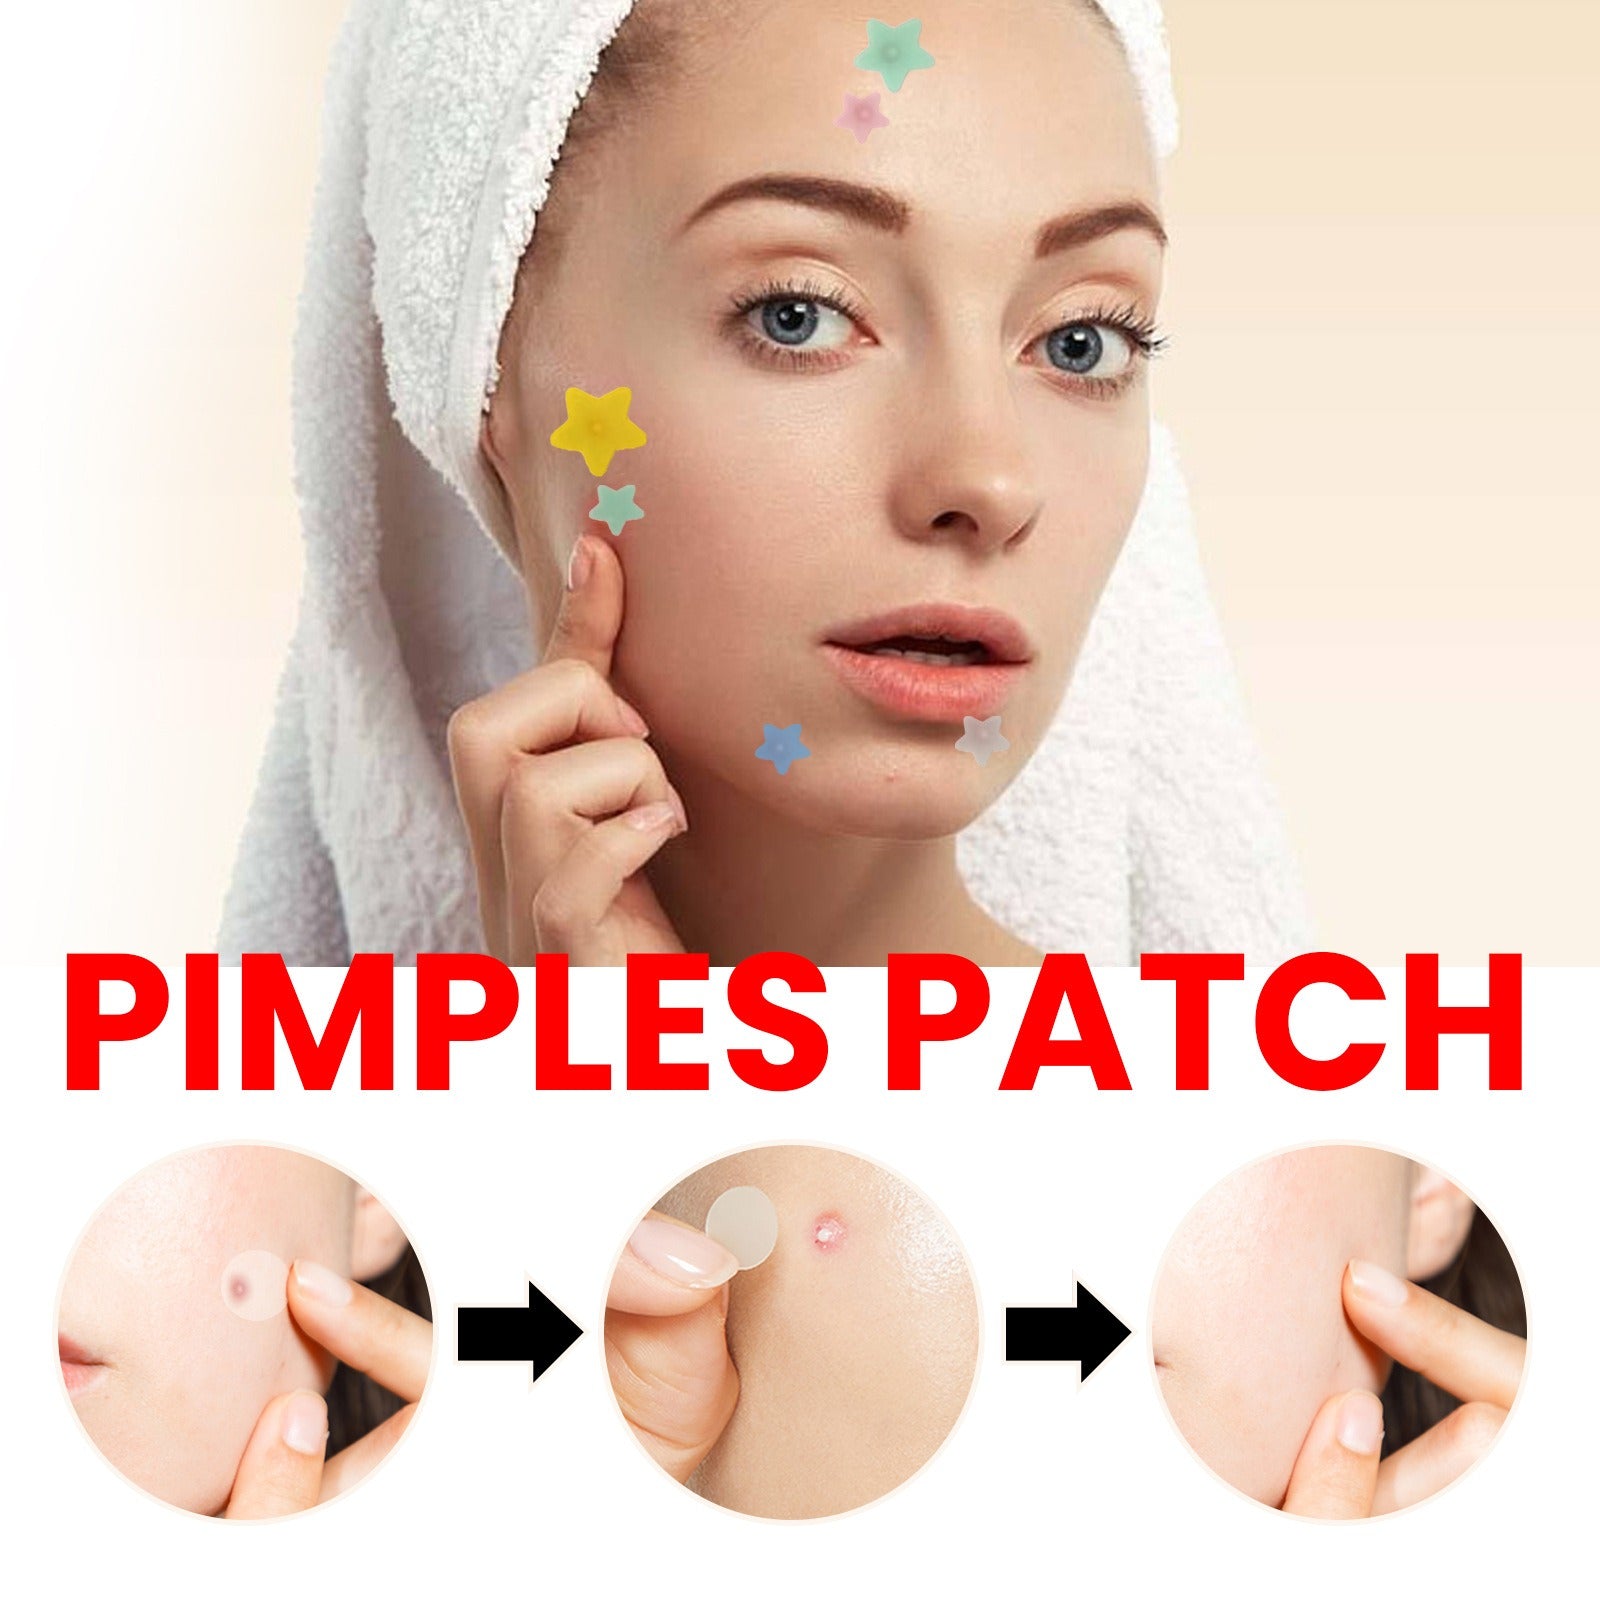 JaysuingRepair Acne Patch Facial Skin Care Fade Blemishes Pimple Marks Closed Acne Blemishes Cover Acne Pimple Repair Patch